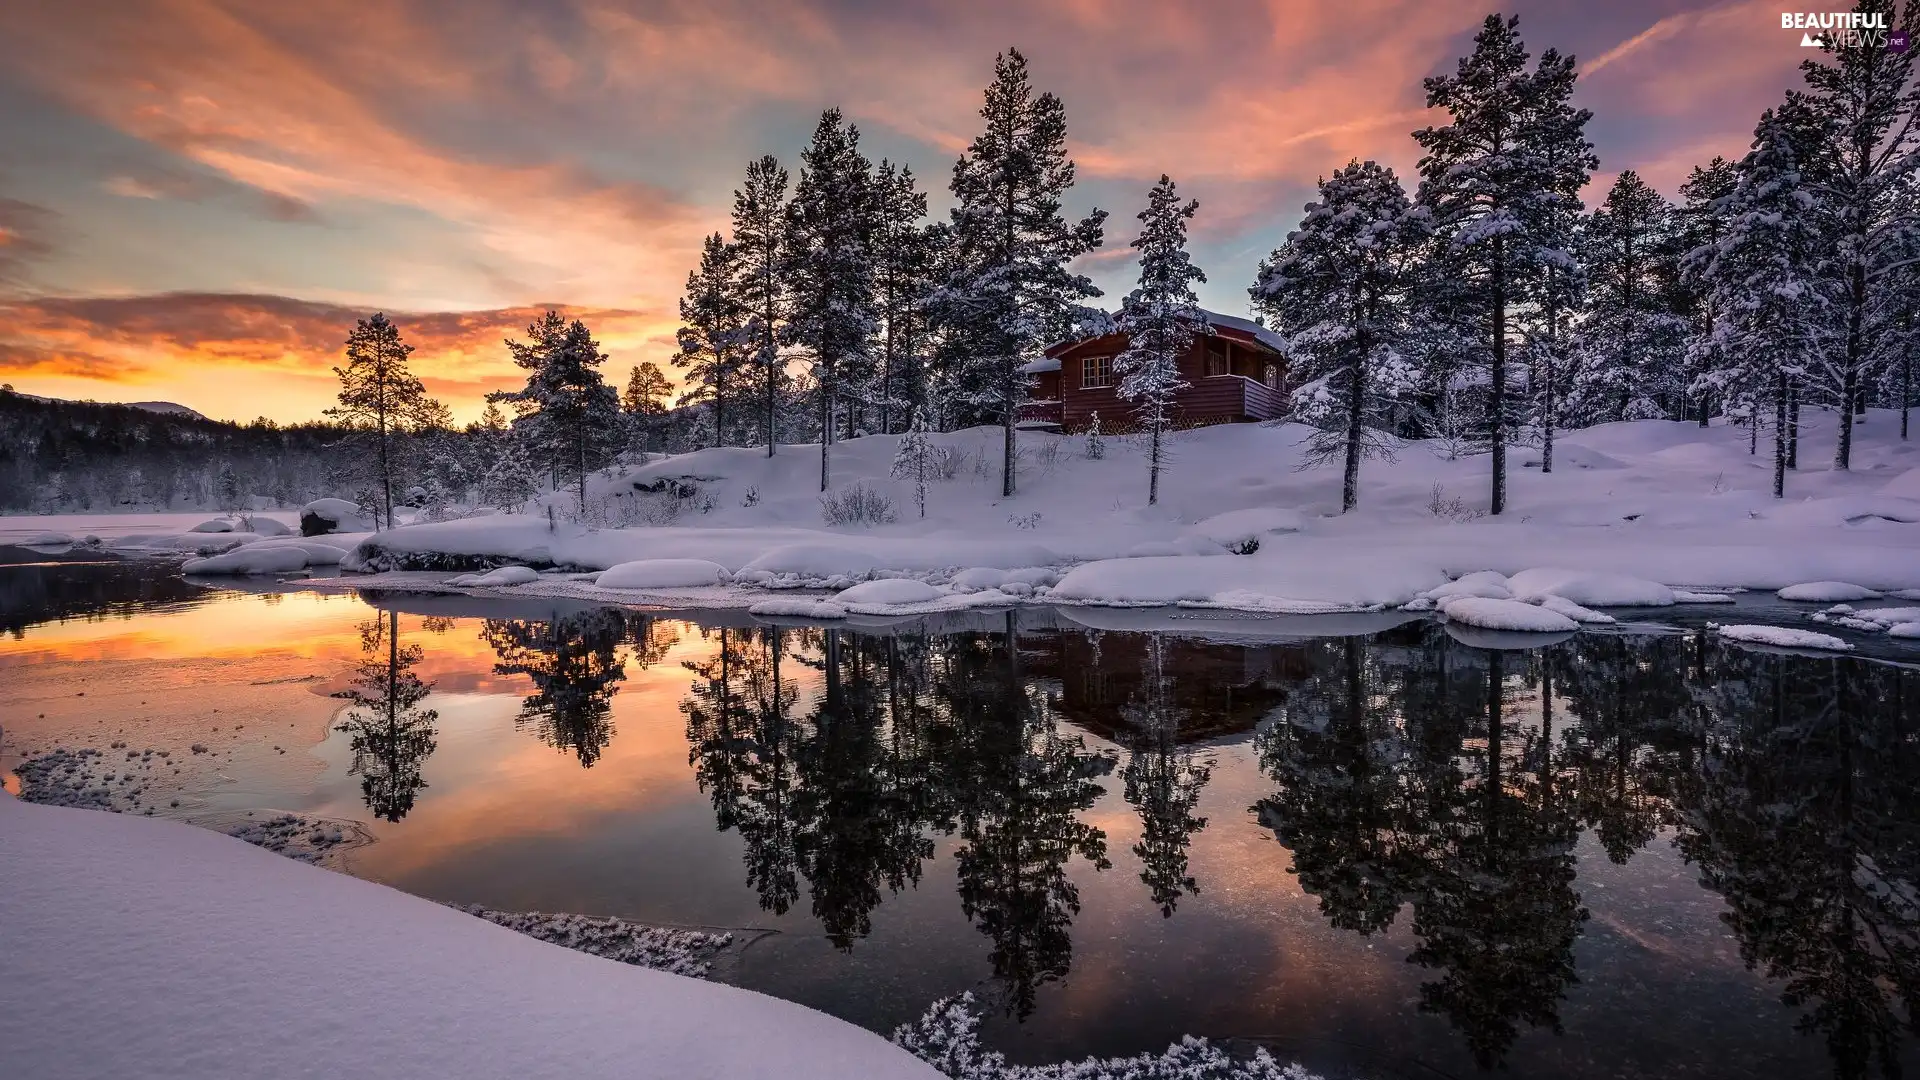 trees, winter, Houses, Great Sunsets, viewes, River